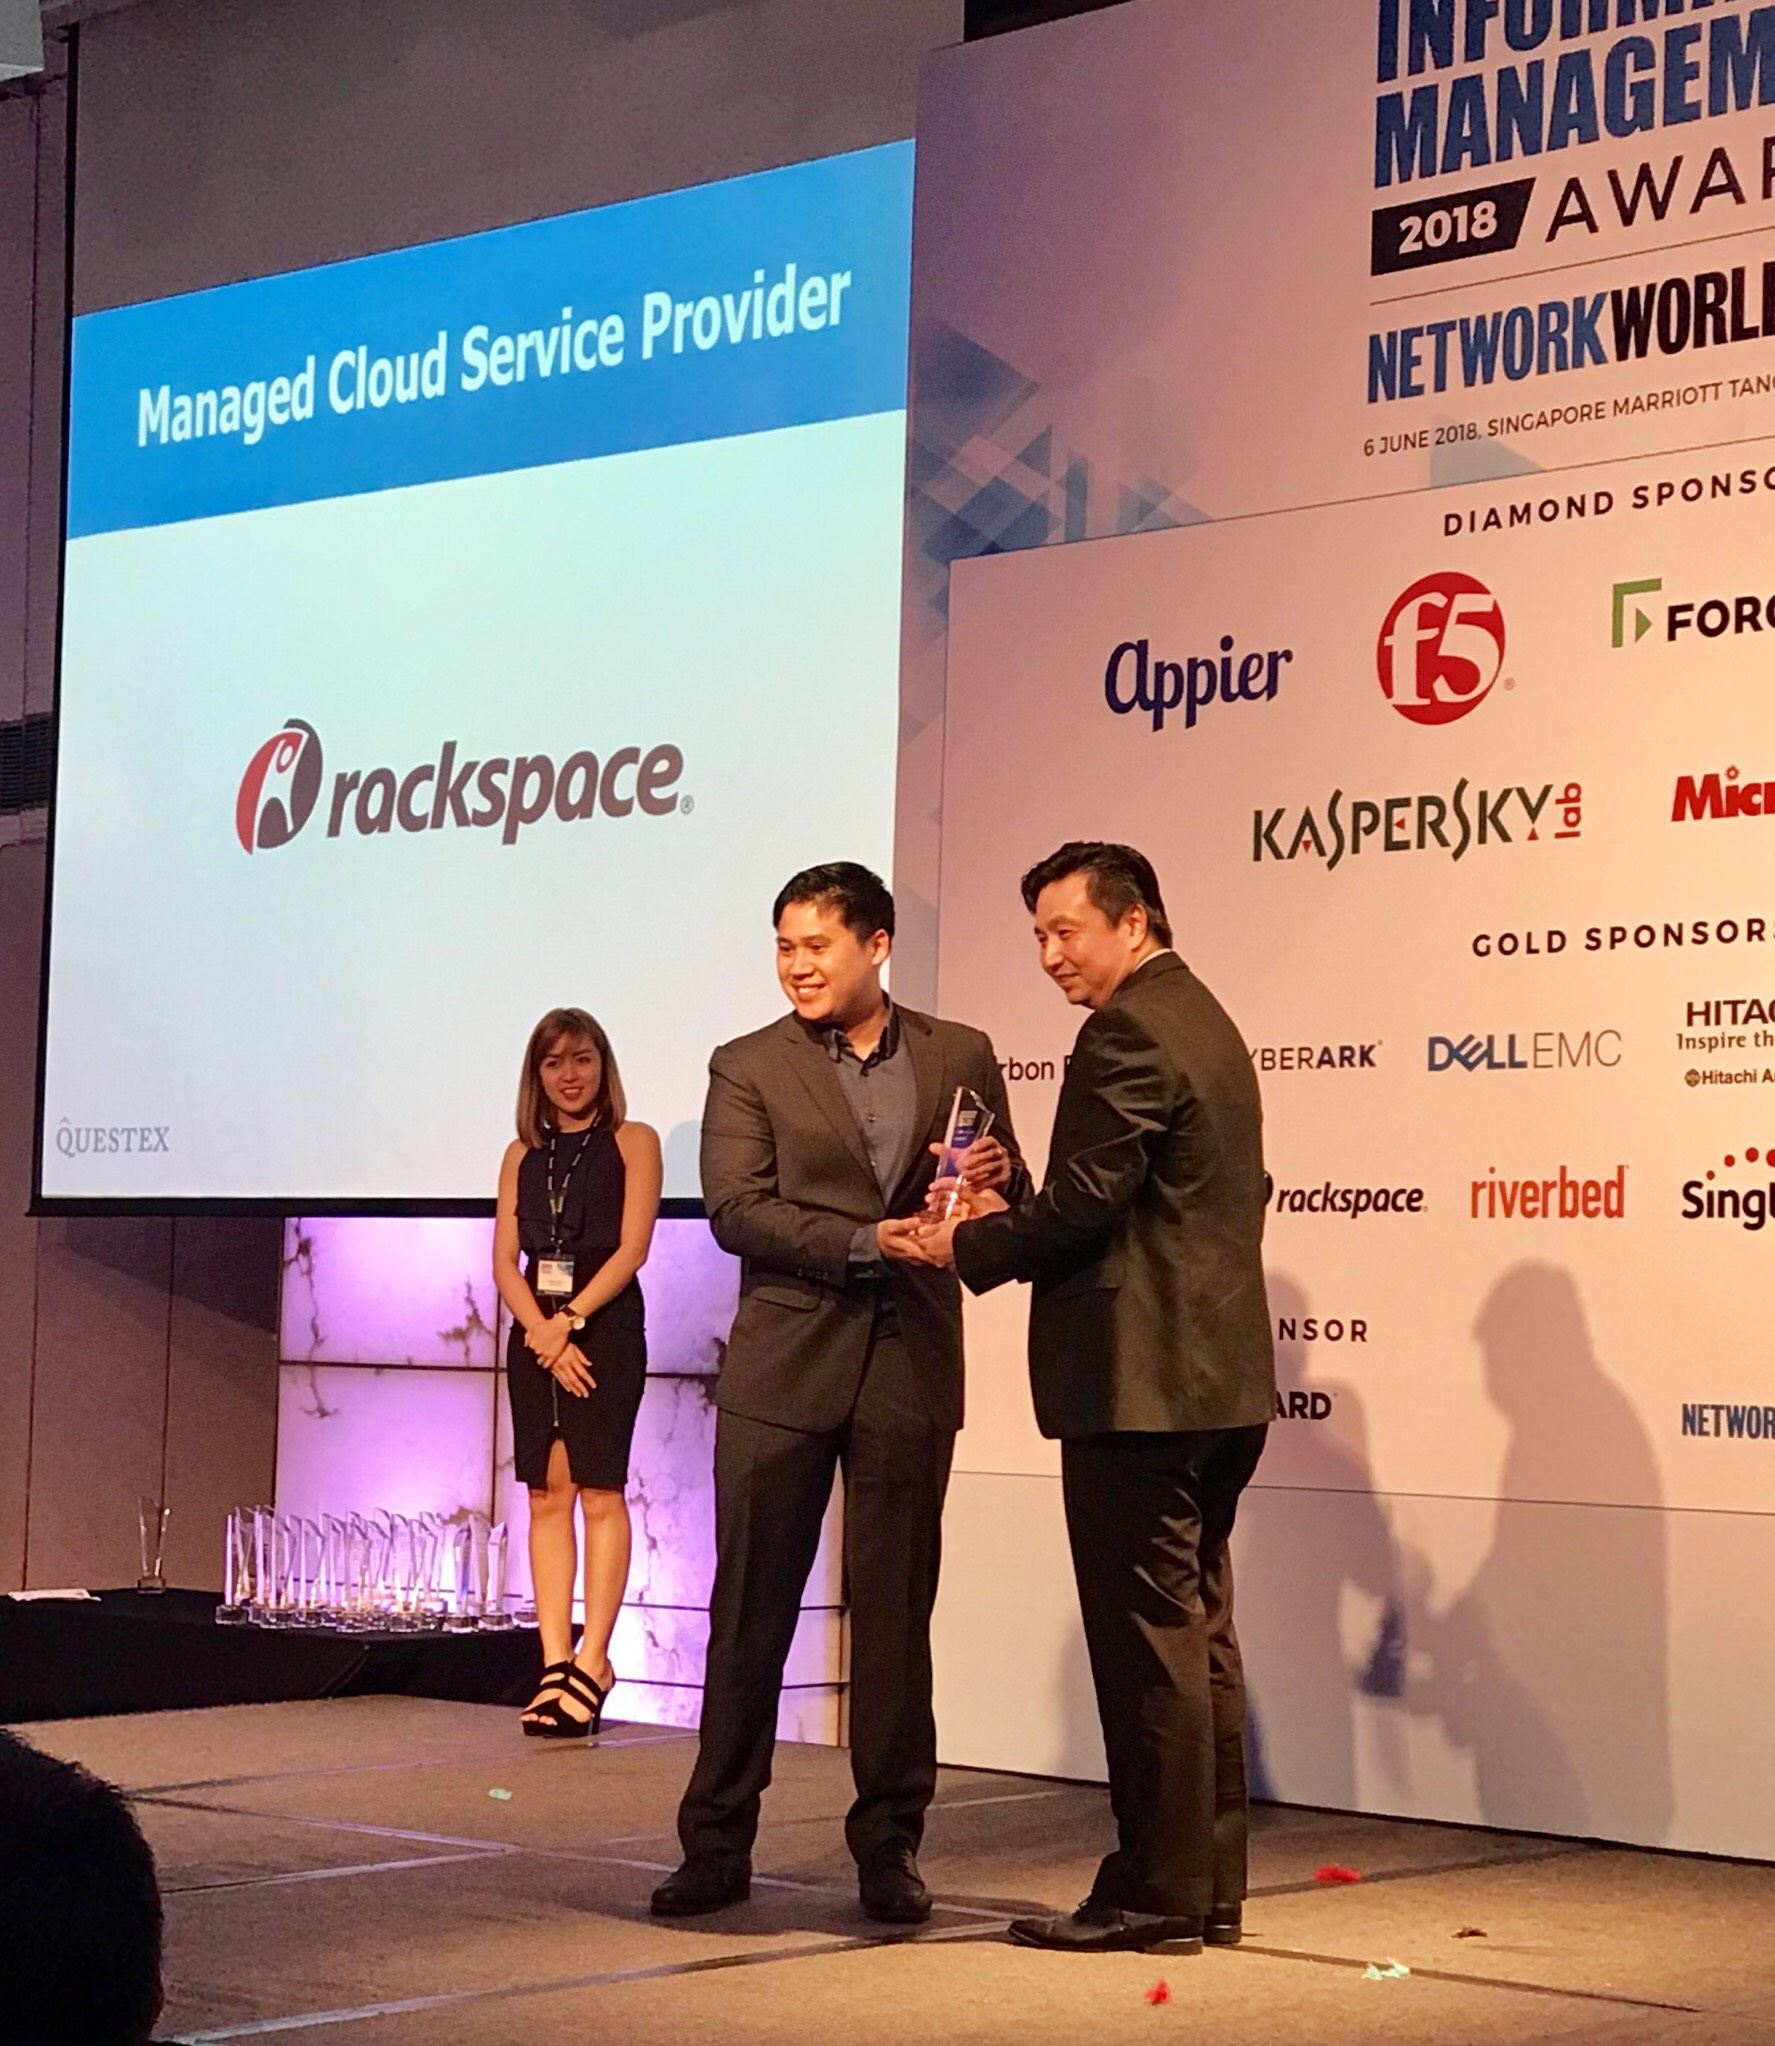 Rackspace Wins Managed Cloud Service Provider from NetworkWorld Asia   